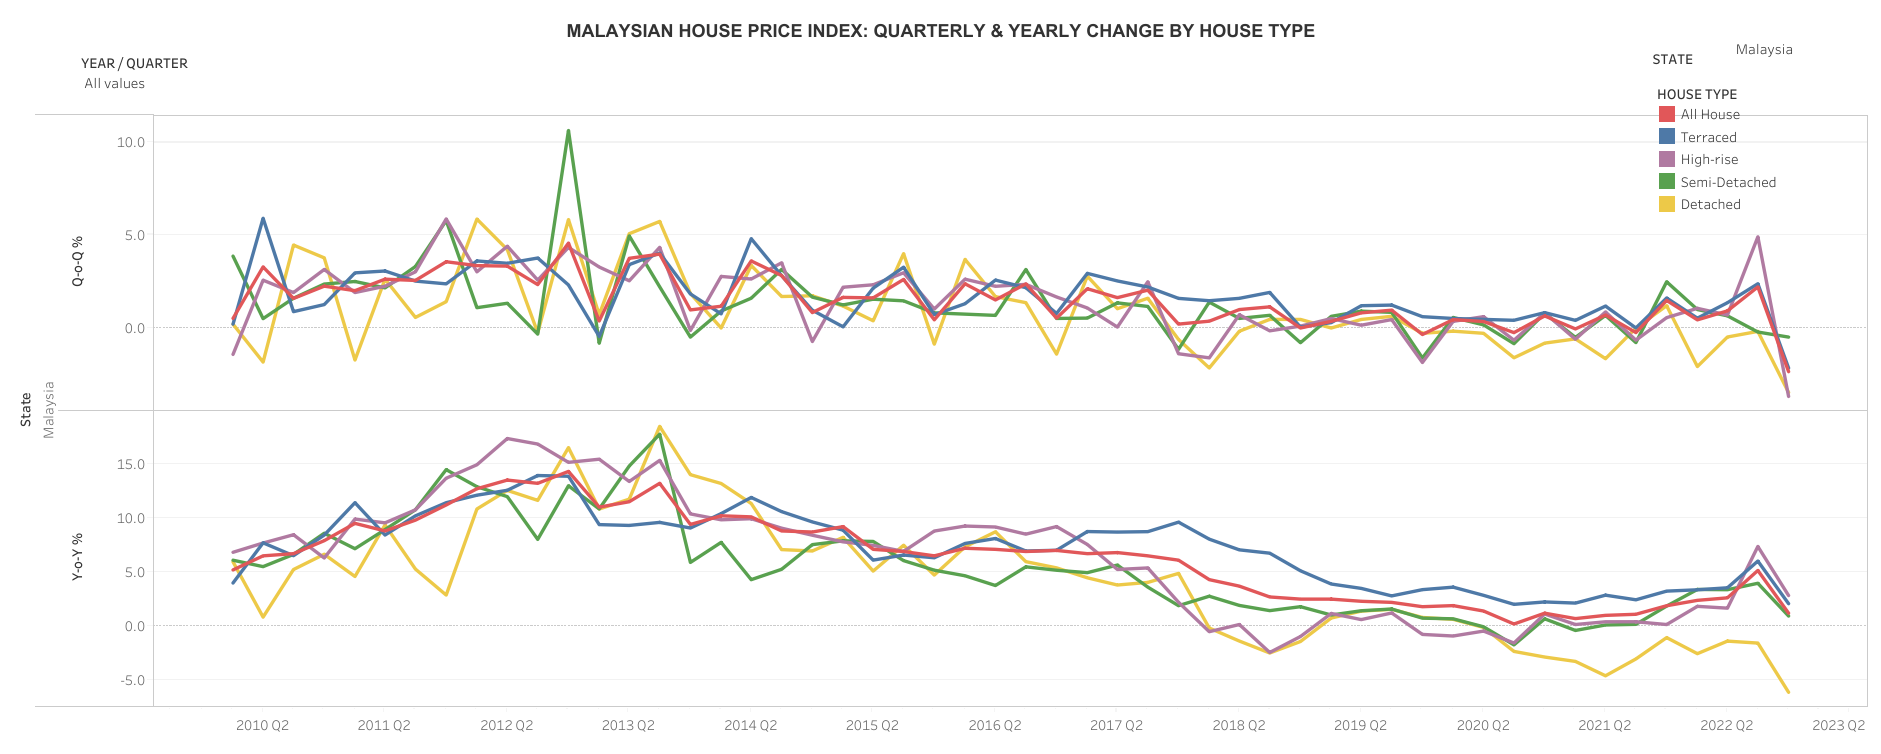 MHPI (Quarterly & Yearly Change by House Type)